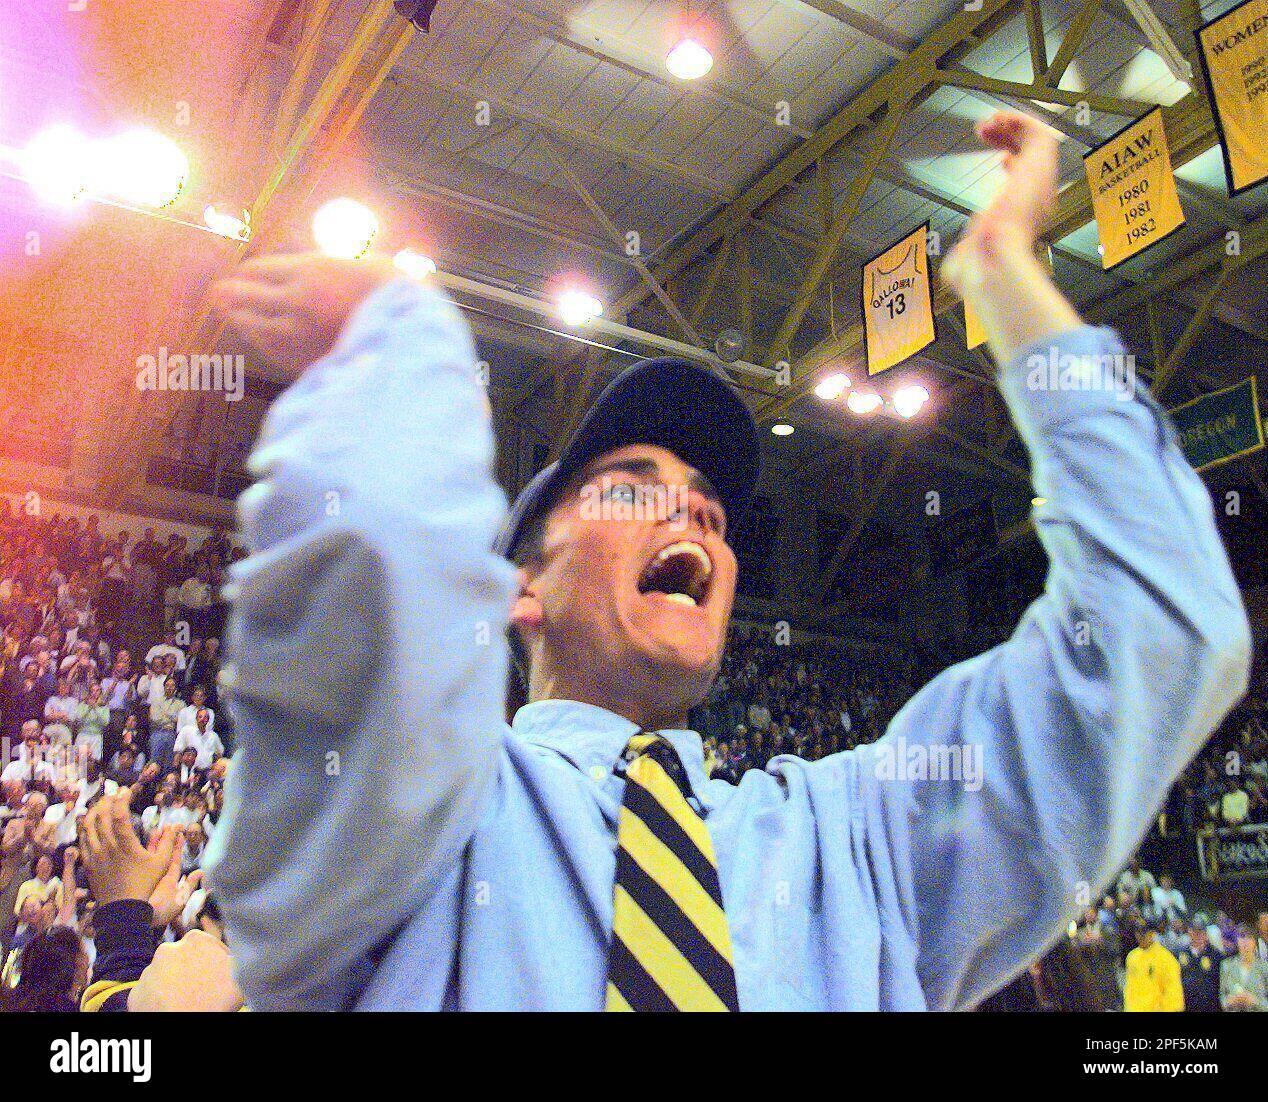 CAL HARMON/C/06MAR97/SP/LS Yell leader, DAVID GEHRKE, senior, cheers for Cal during the last game played in Harmon Gym in Newell against the Arizona State Sun Devils. Photo By Lea Suzuki (LEA SUZUKI/San Francisco Chronicle via AP) Stock Photo